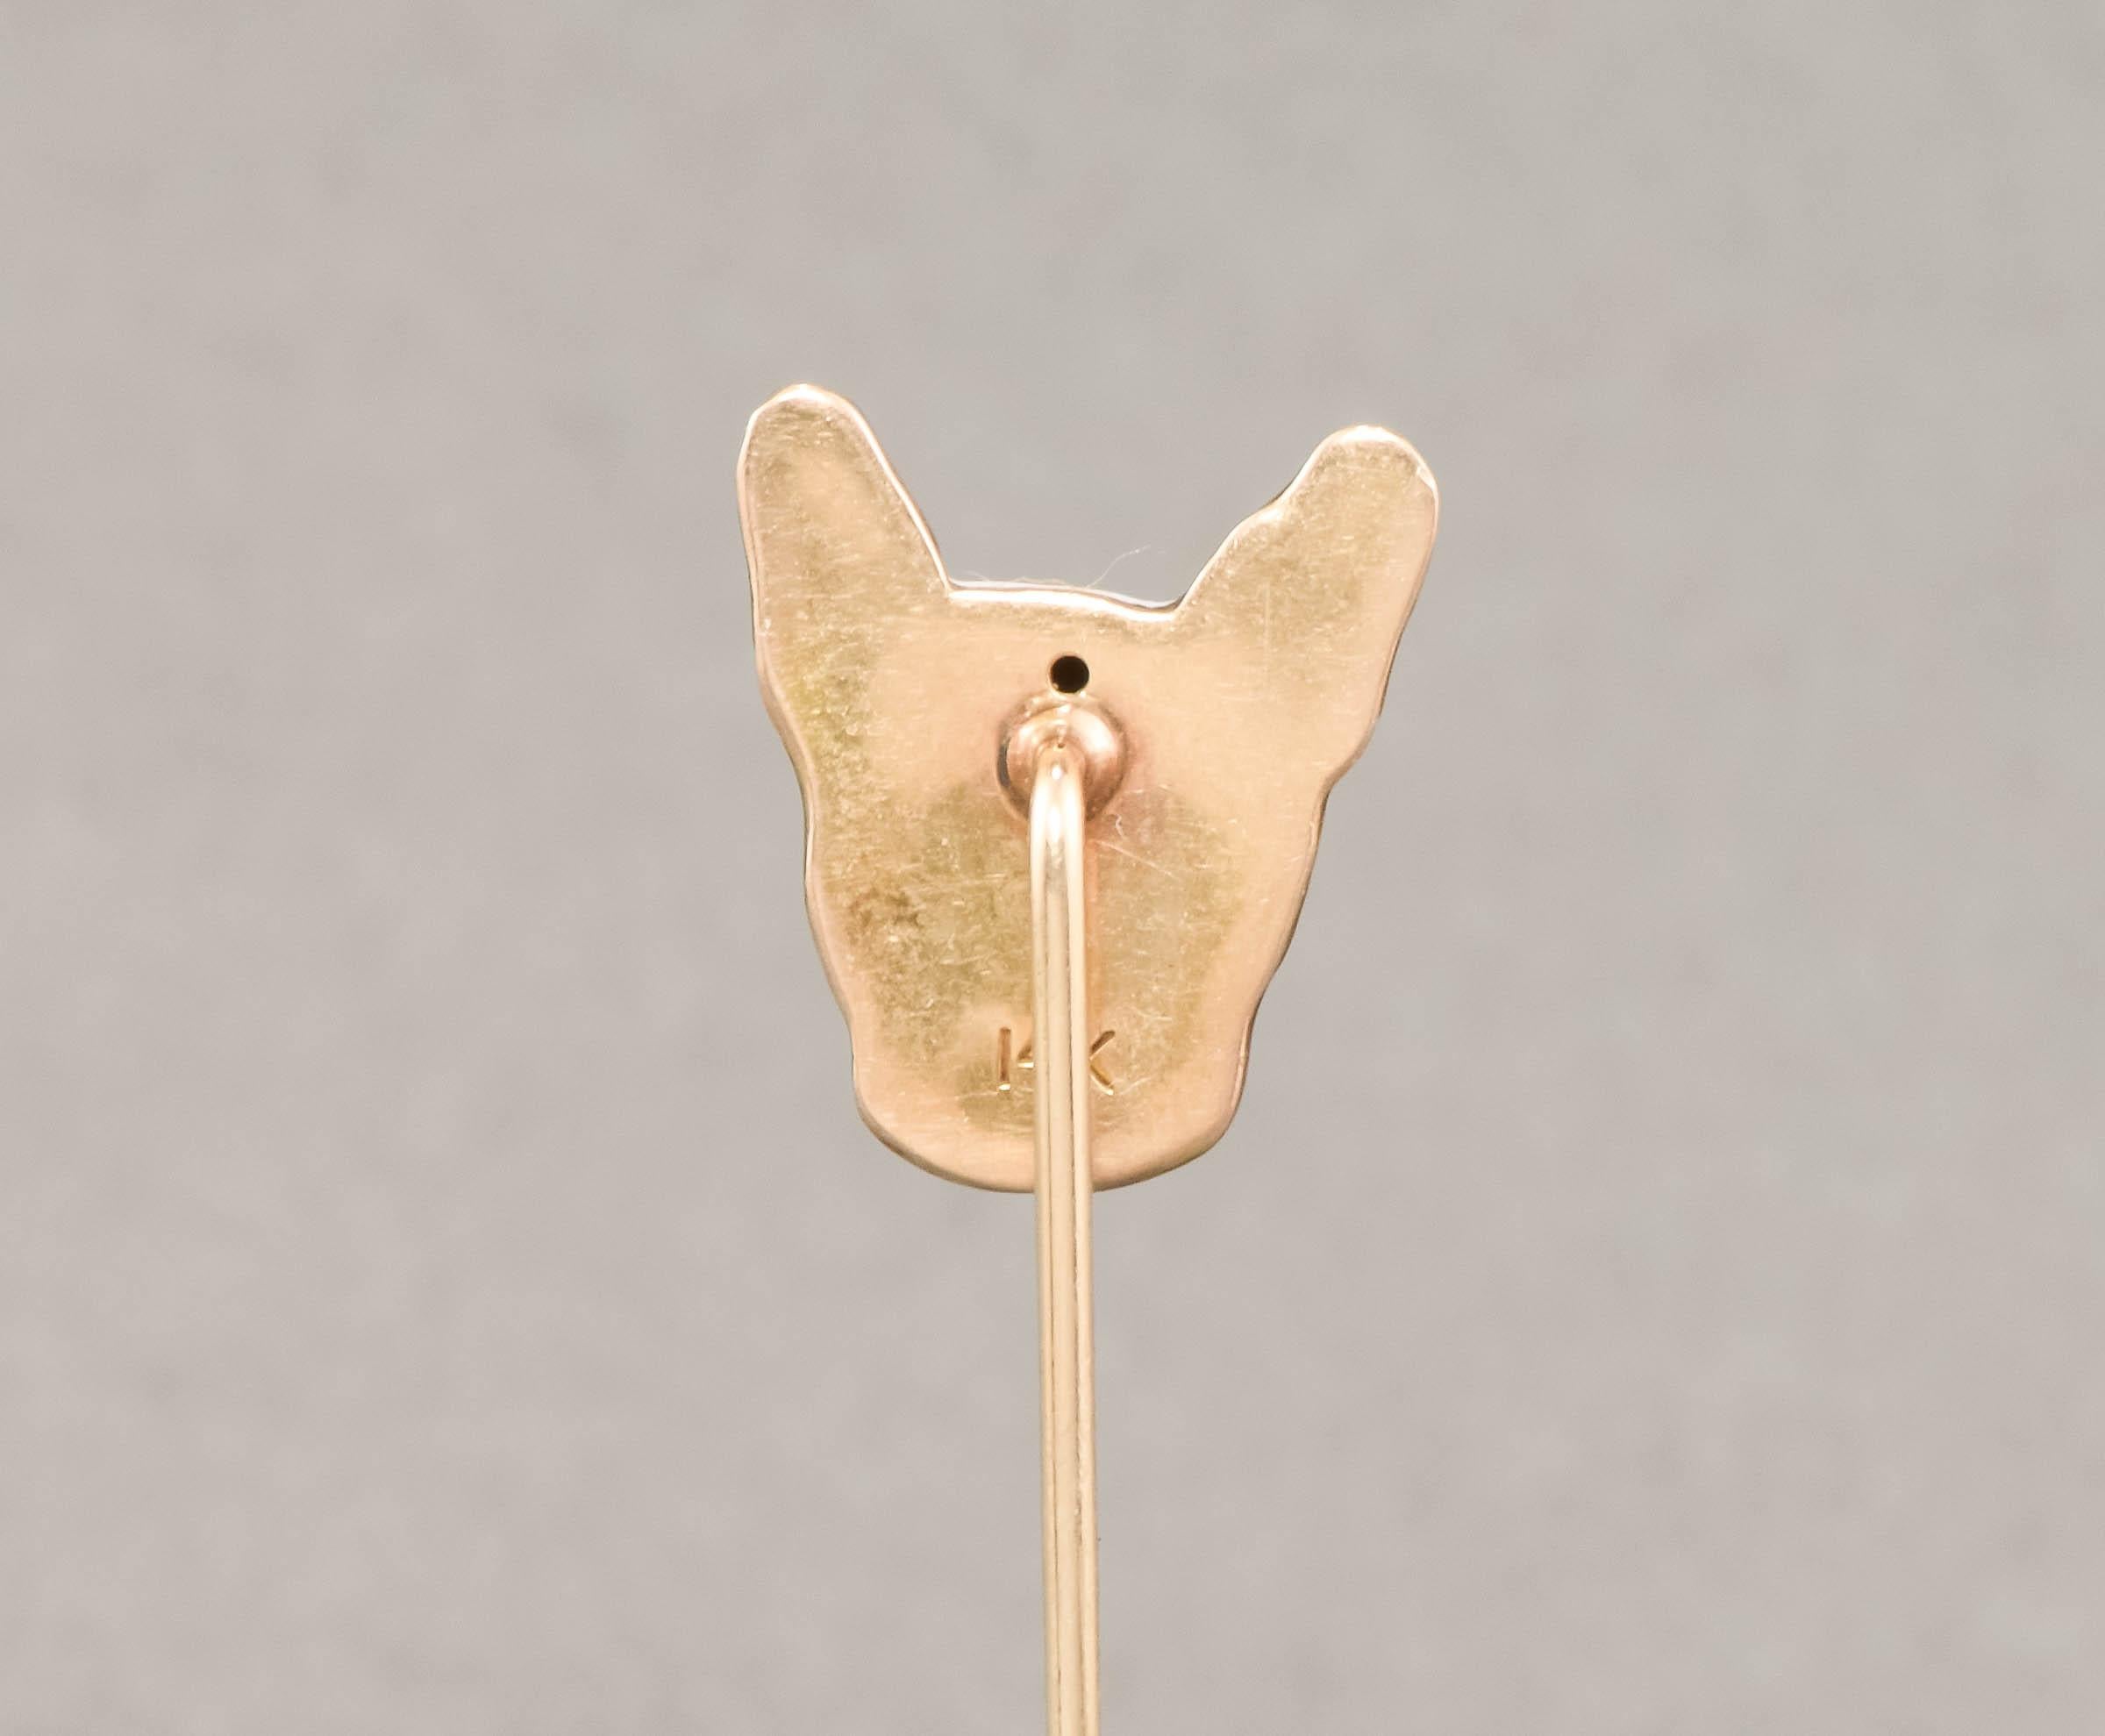 Antique Enamel French Bulldog with Diamond Eyes 14K Gold Stick Pin - Cravat Pin In Good Condition For Sale In Danvers, MA